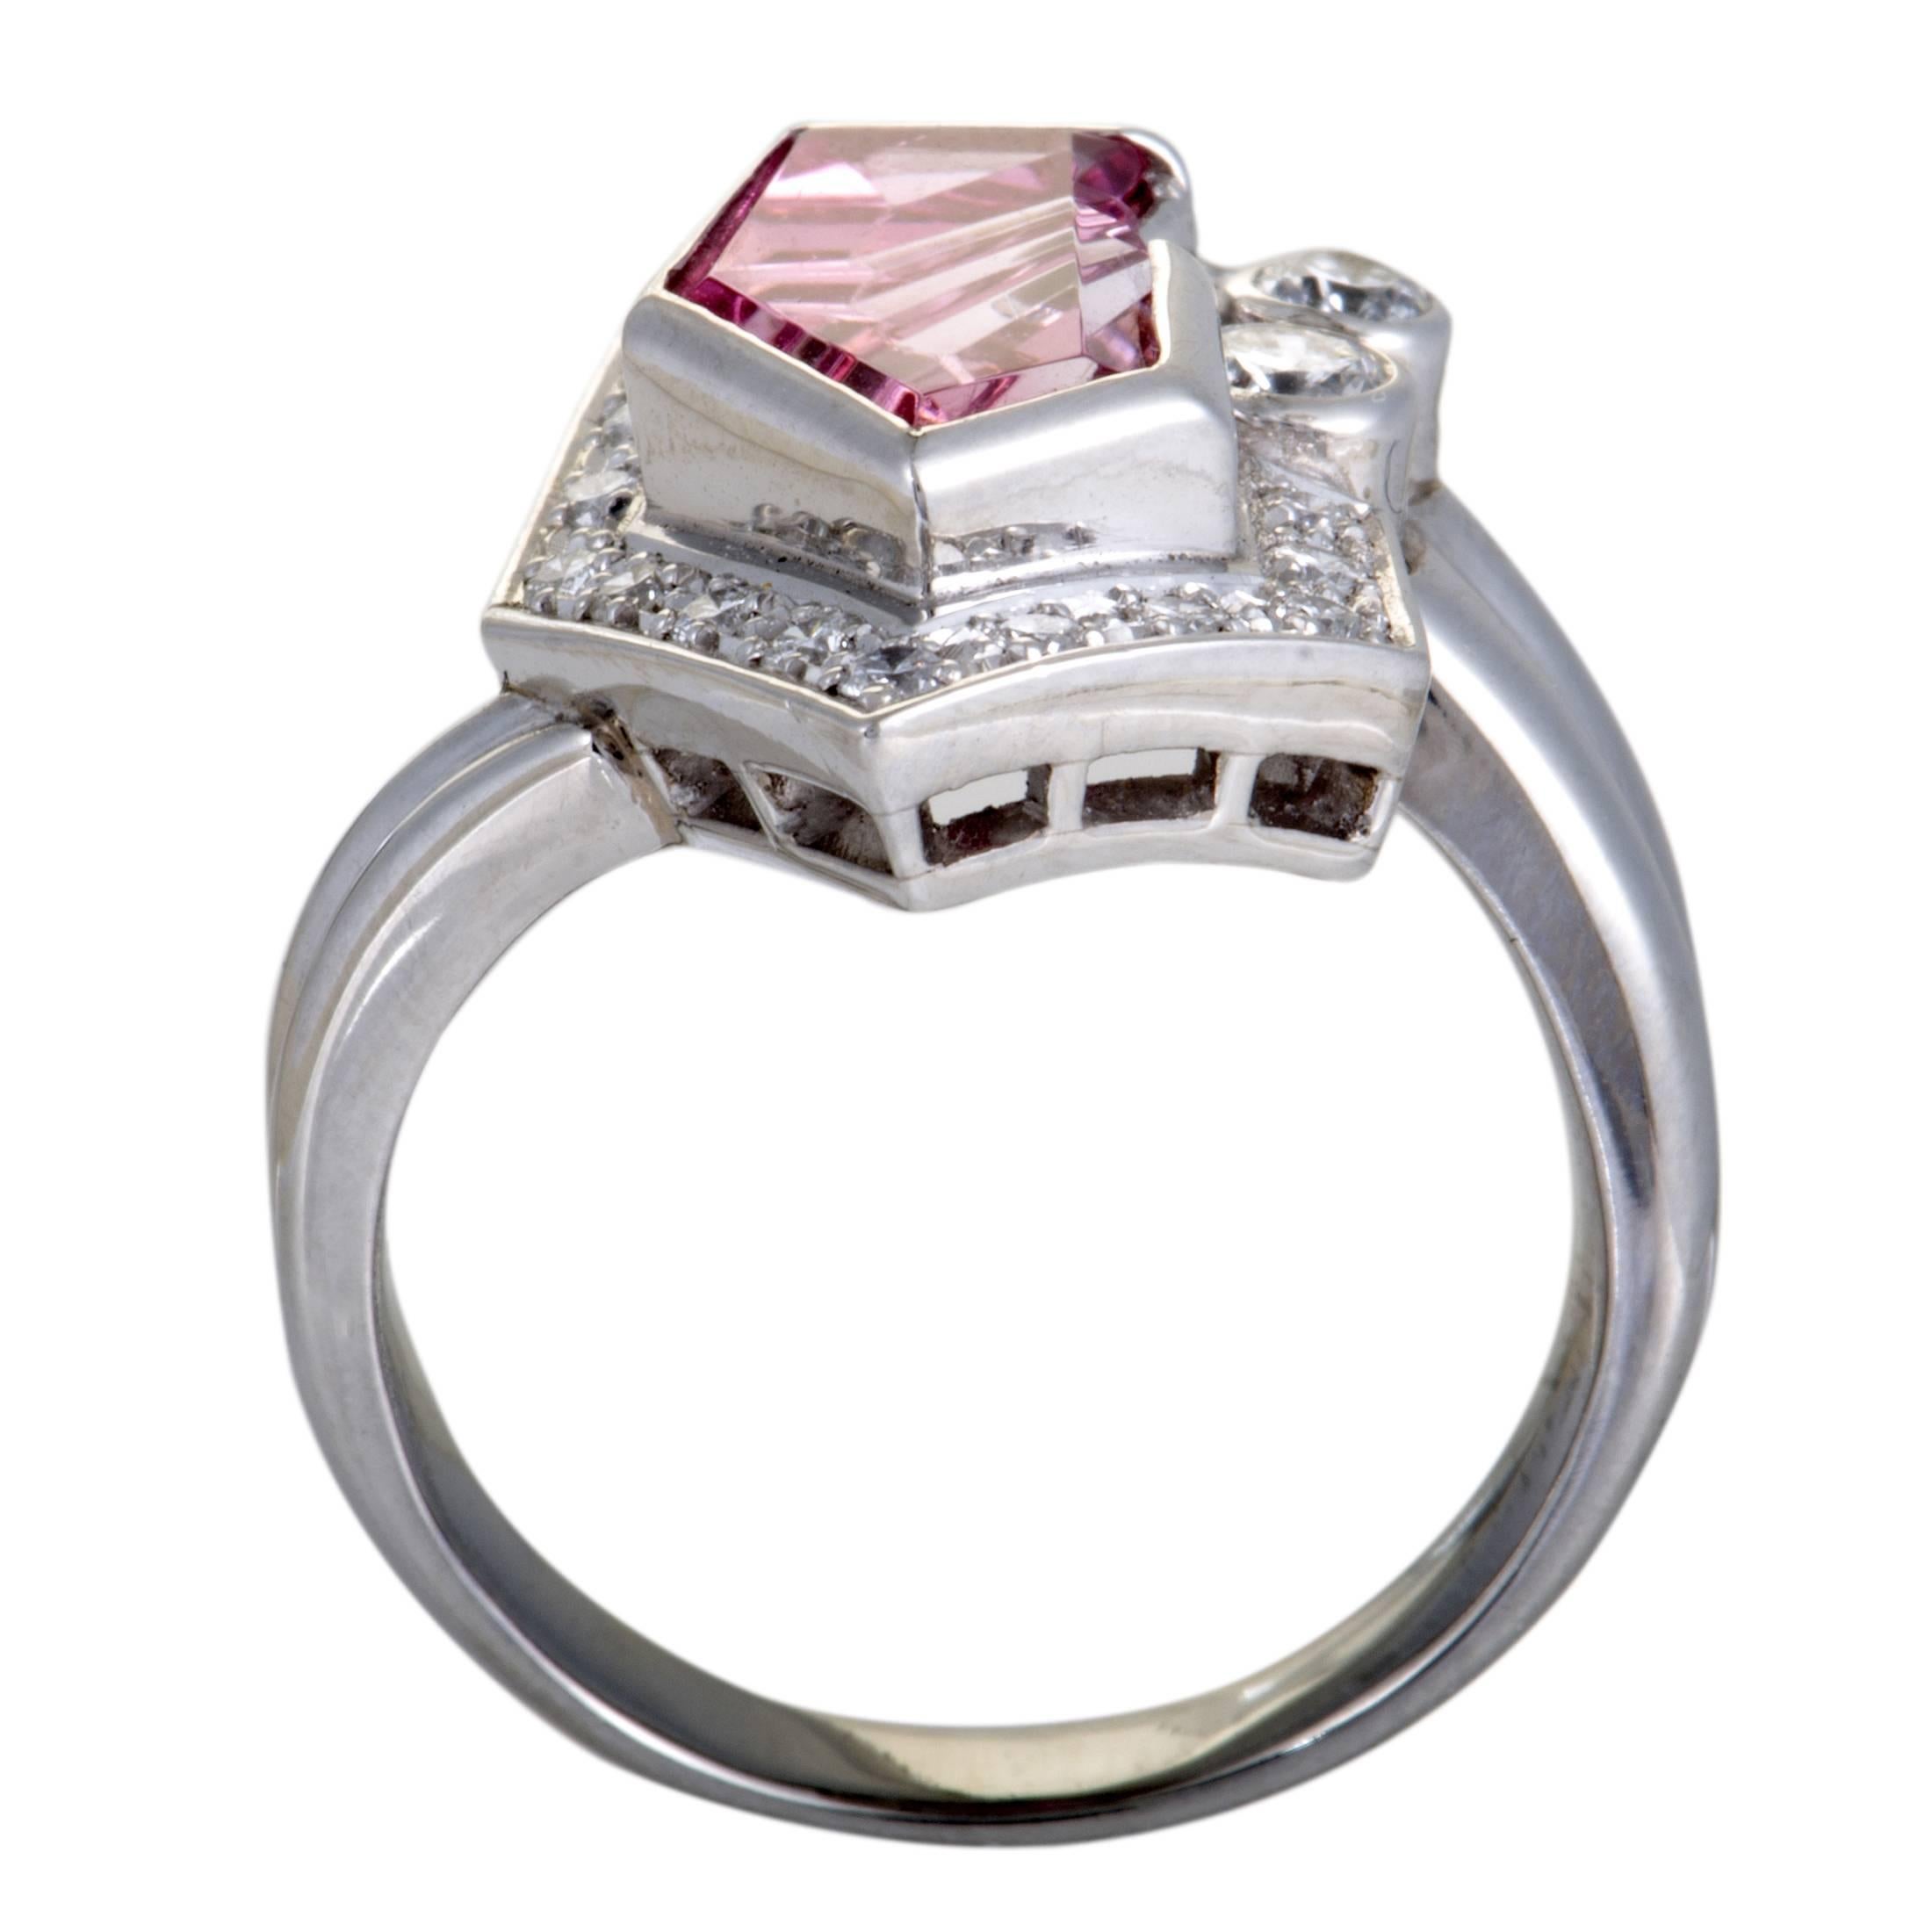 The offbeat design of this ring gives it a distinctly fashionable appeal, while the sumptuous décor comprised of diamond stones and a pink tourmaline adds a compelling touch of extravagance to the piece. The ring is made of platinum and boasts 0.39